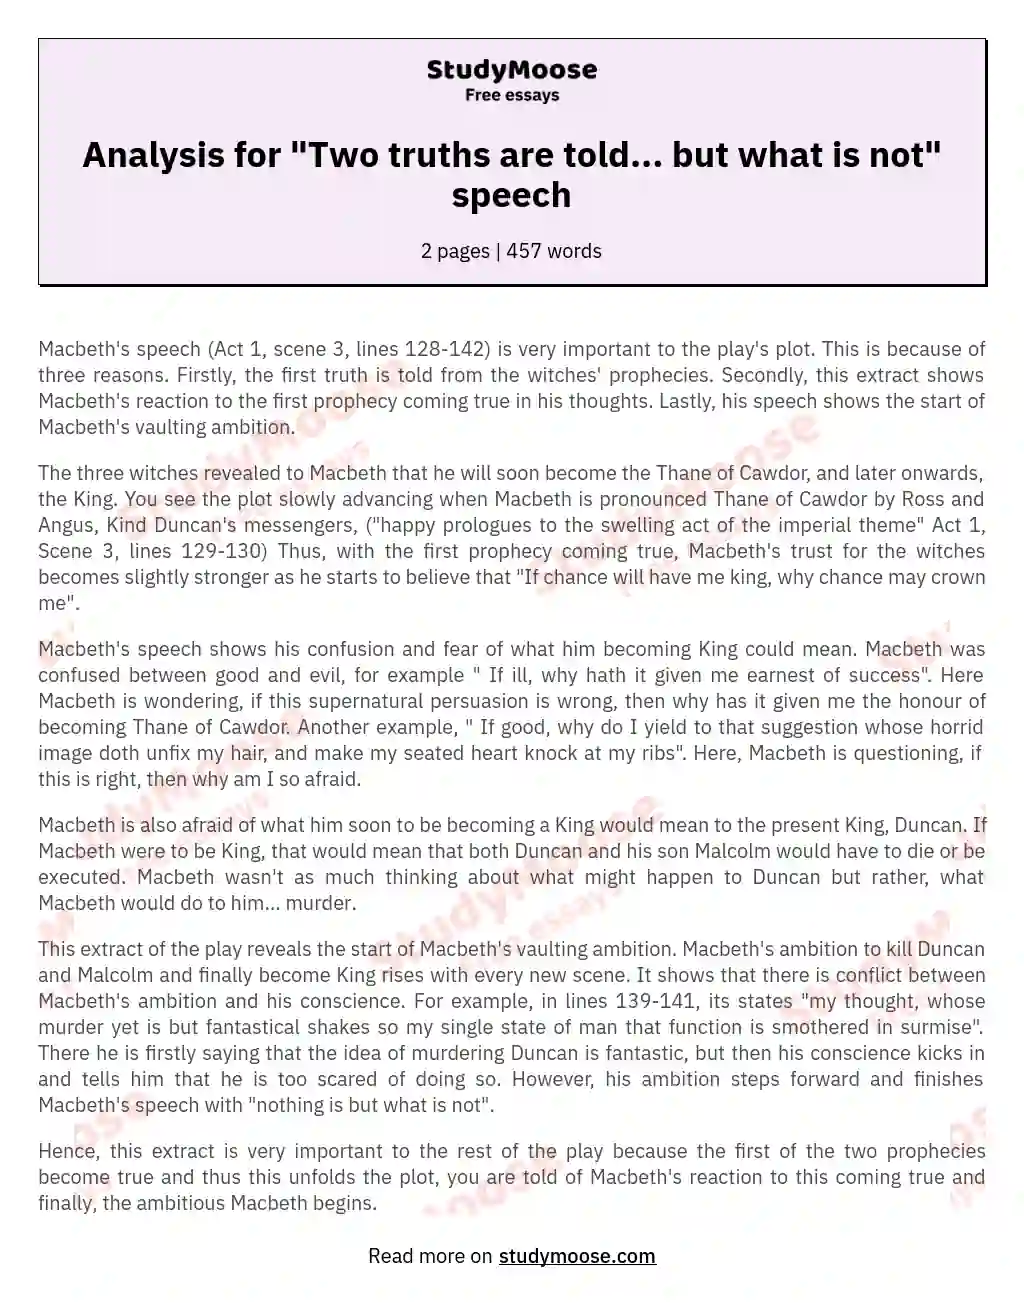 Analysis for "Two truths are told... but what is not" speech essay